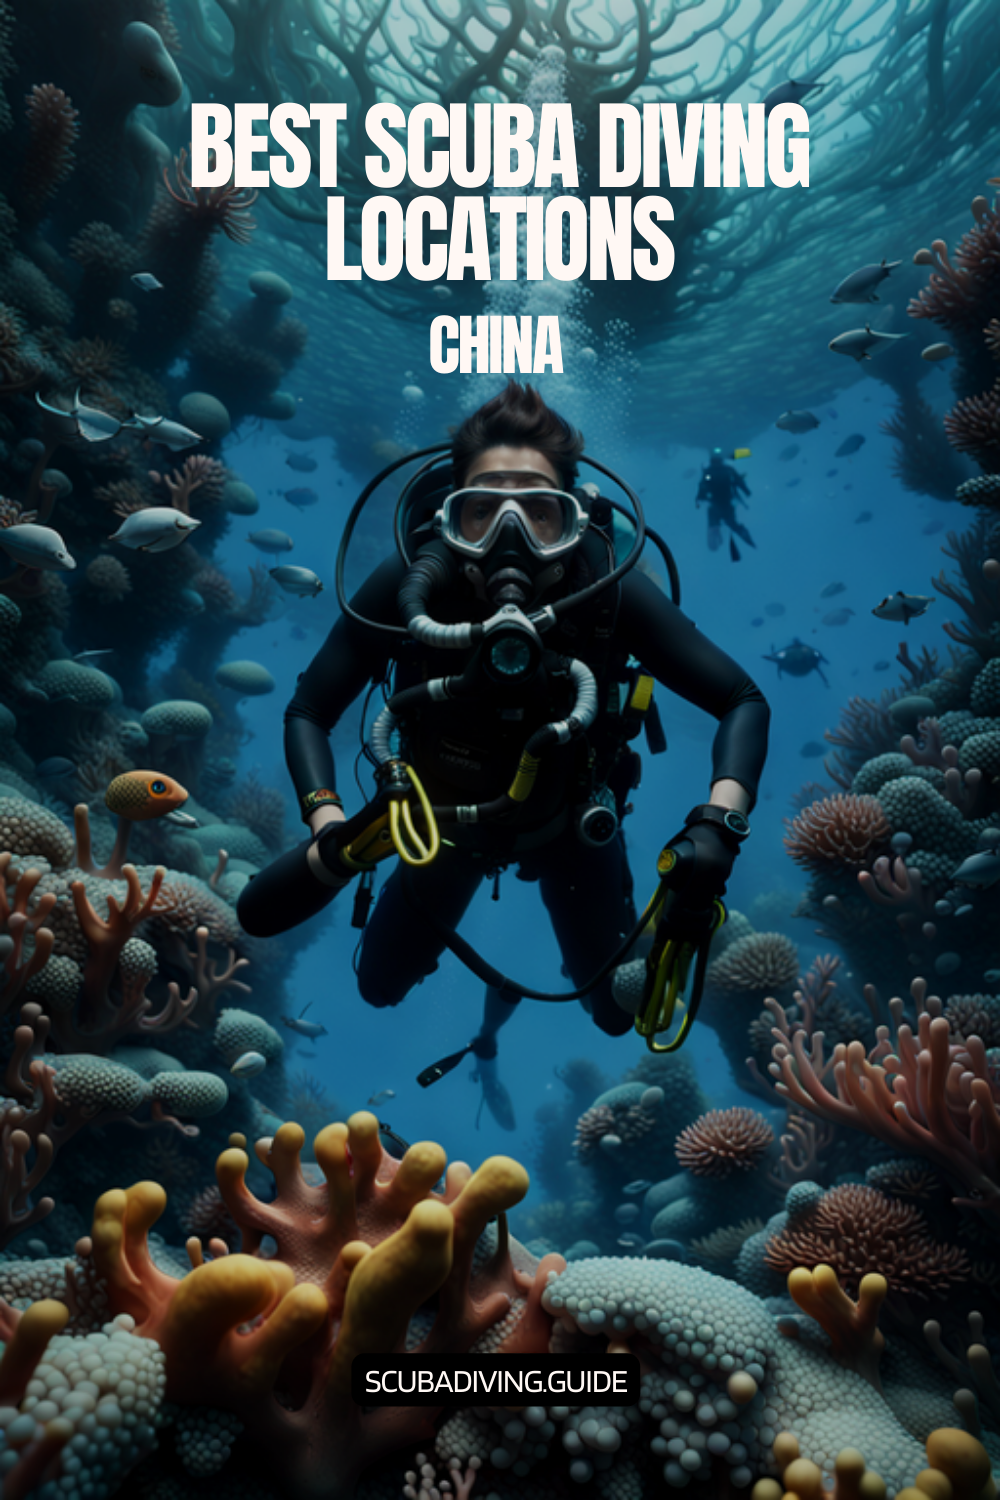 Scuba Diving Locations in China